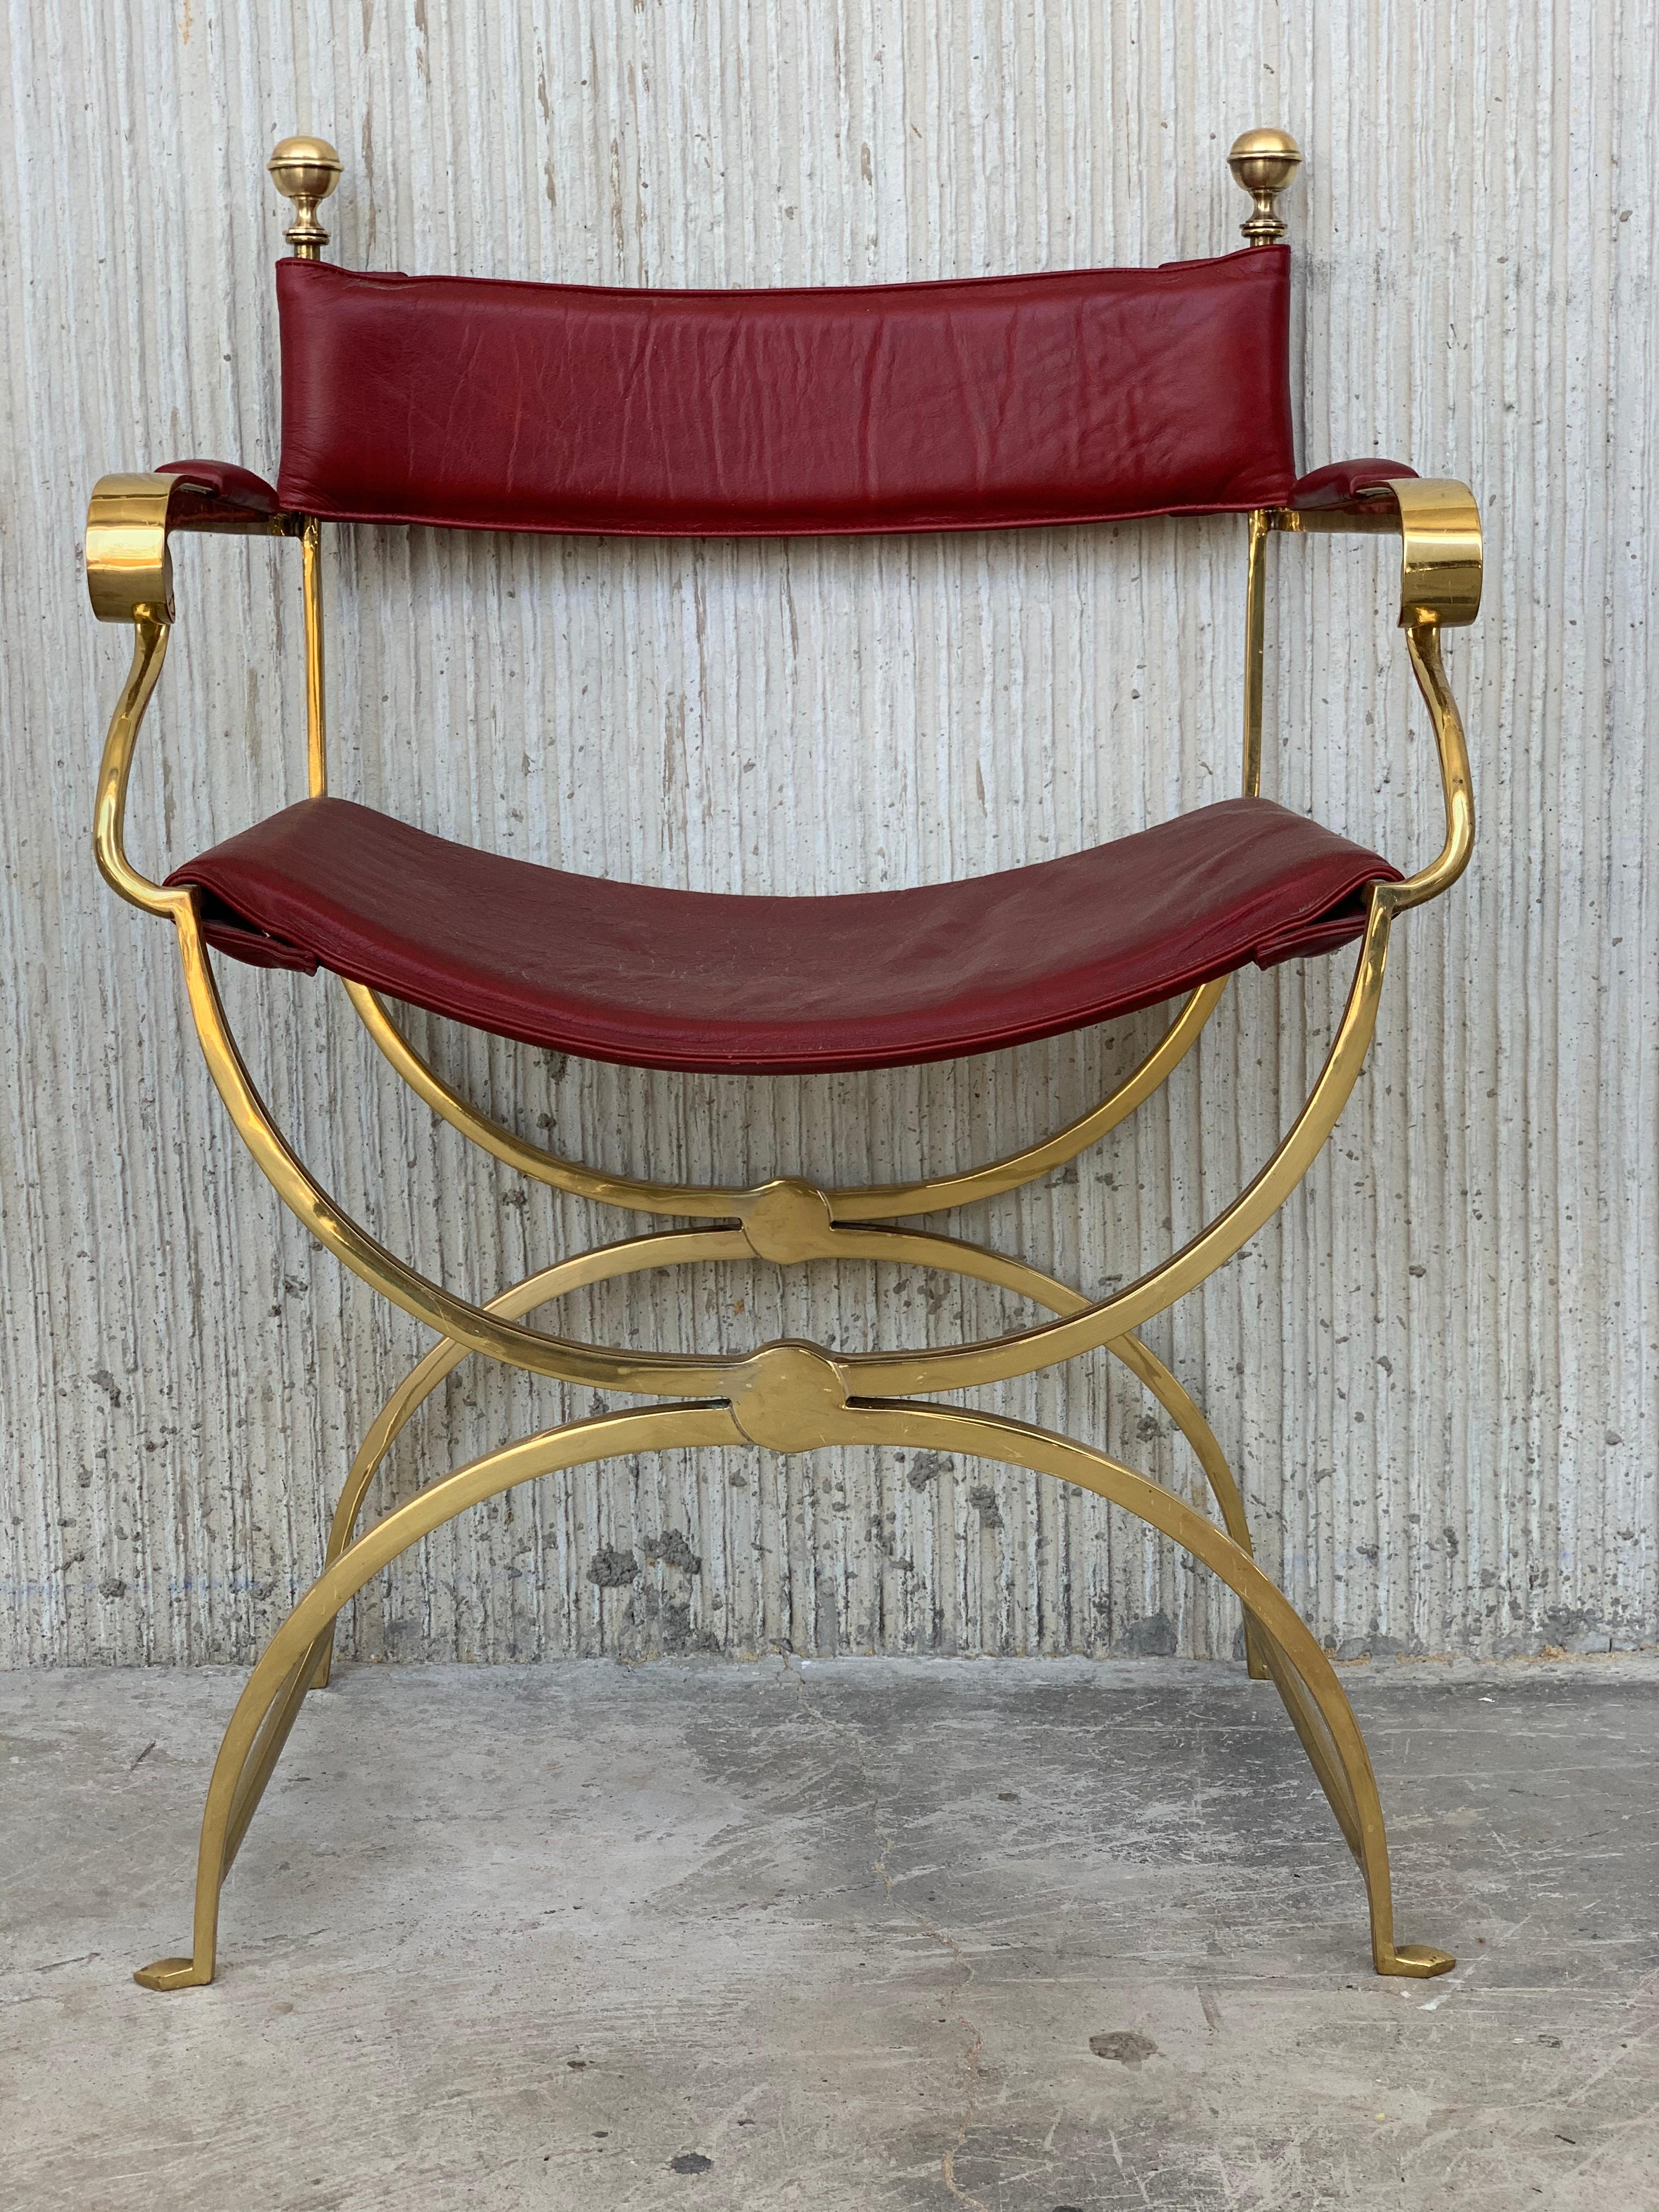 1960s Italian Hollywood Regency Chrome and Leather Savonarola Director's Chairs For Sale 2